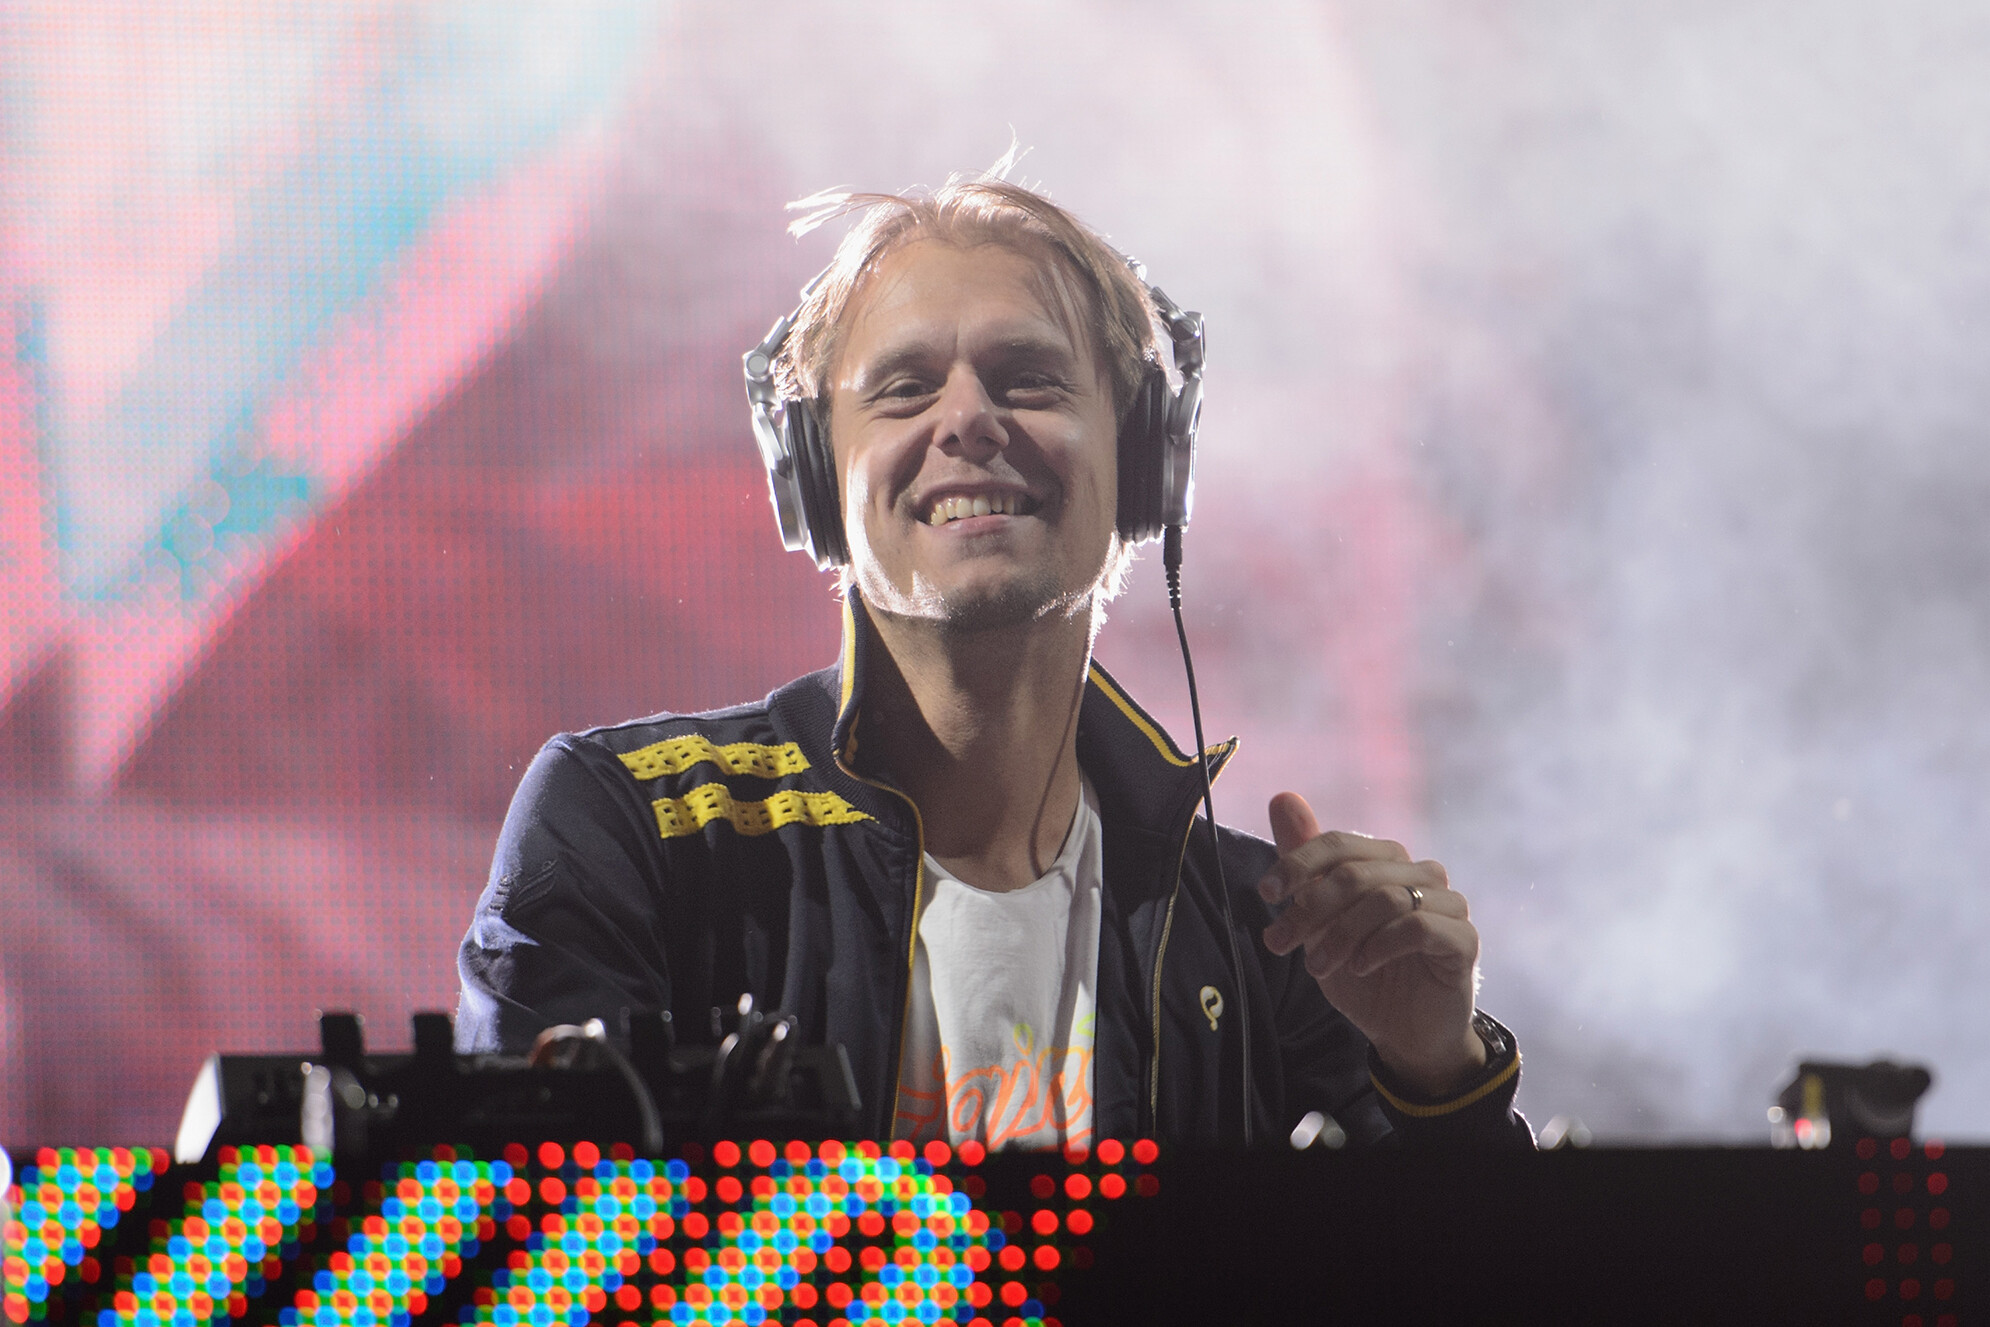 Armin Van Buuren: The first single "Going Wrong" debuted on DJ's A State of Trance radio show. 1990x1330 HD Background.